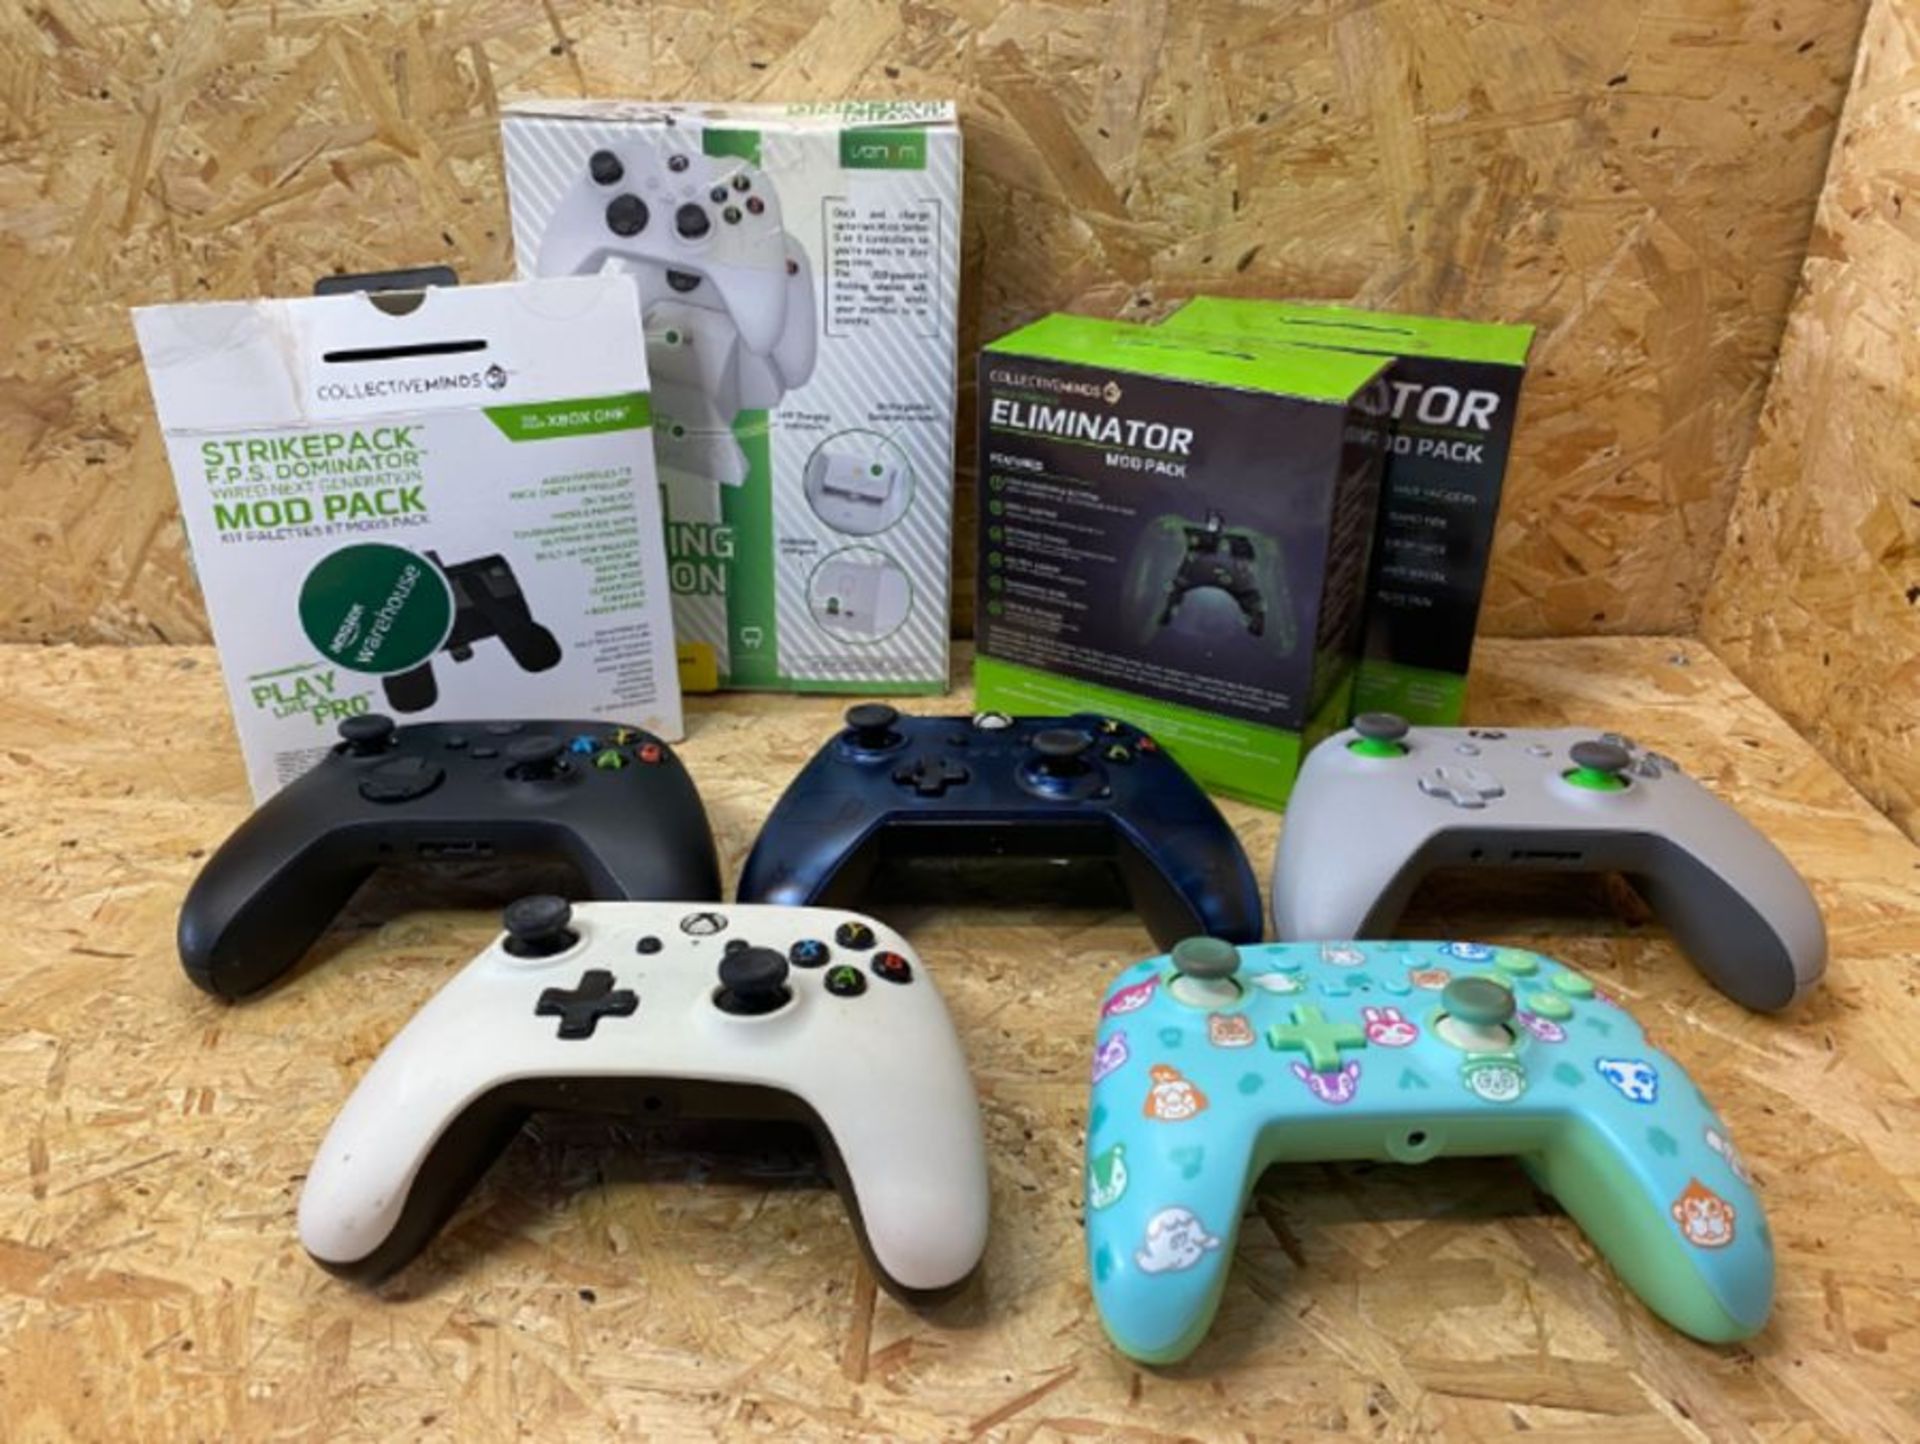 1 X X BOX BUNDLE INCLUDING 5 CONTROLLERS 3 MOD KITS AND A CHARGING DOCK - UNTESTED CUSTOMER